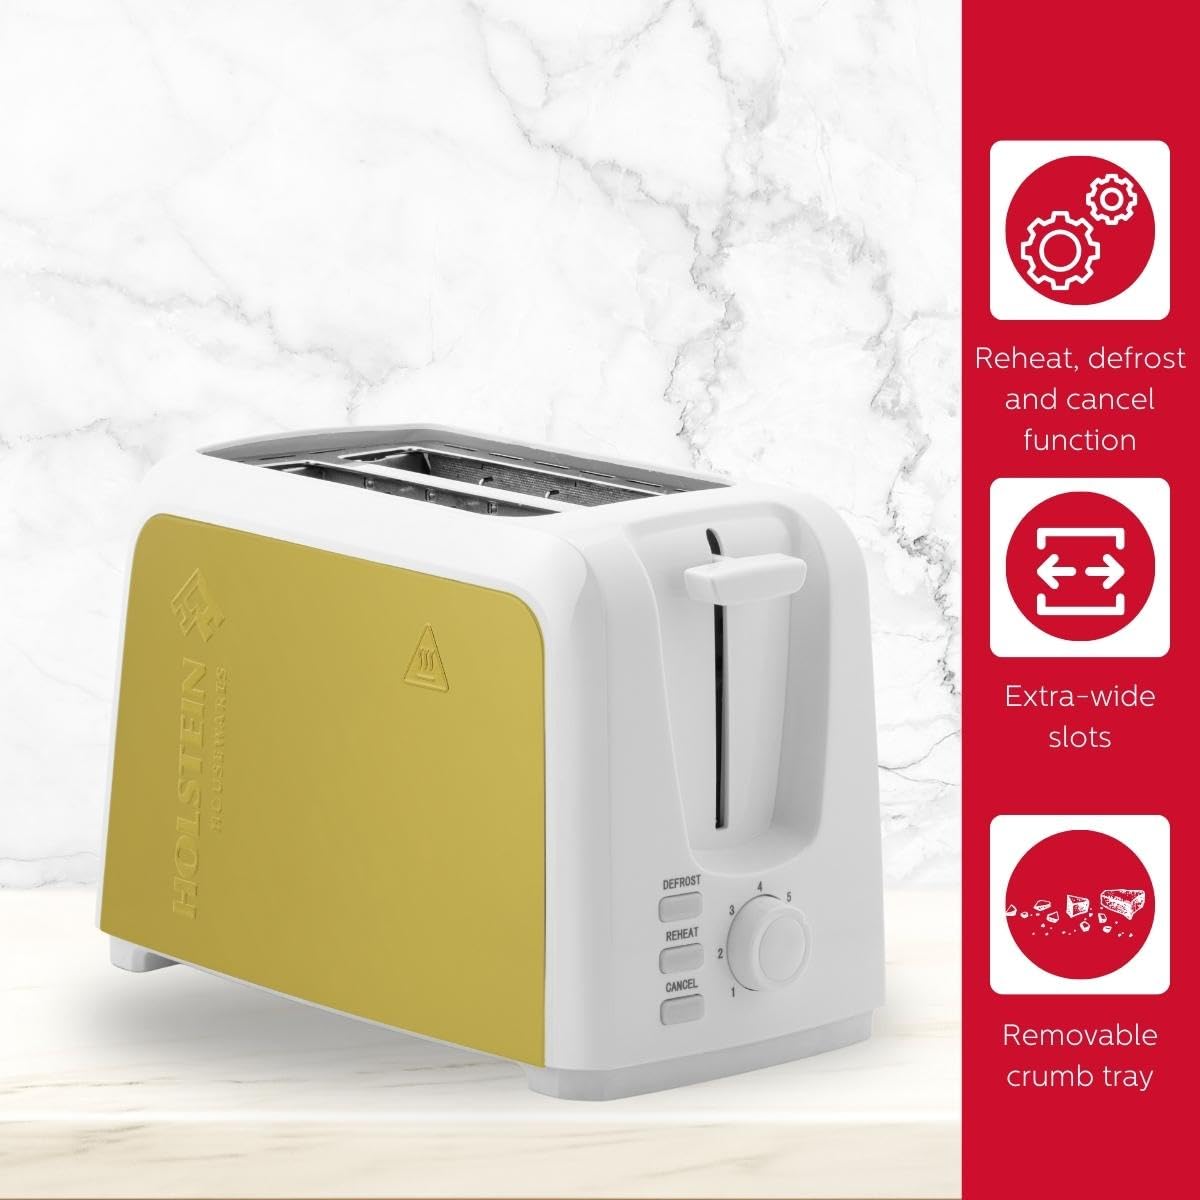 Holstein Housewares 2-Slice Toaster with 7 Browning Control Settings, White and Gold - Great to Toast Bread, Bagels and Waffles. Golden Elegance